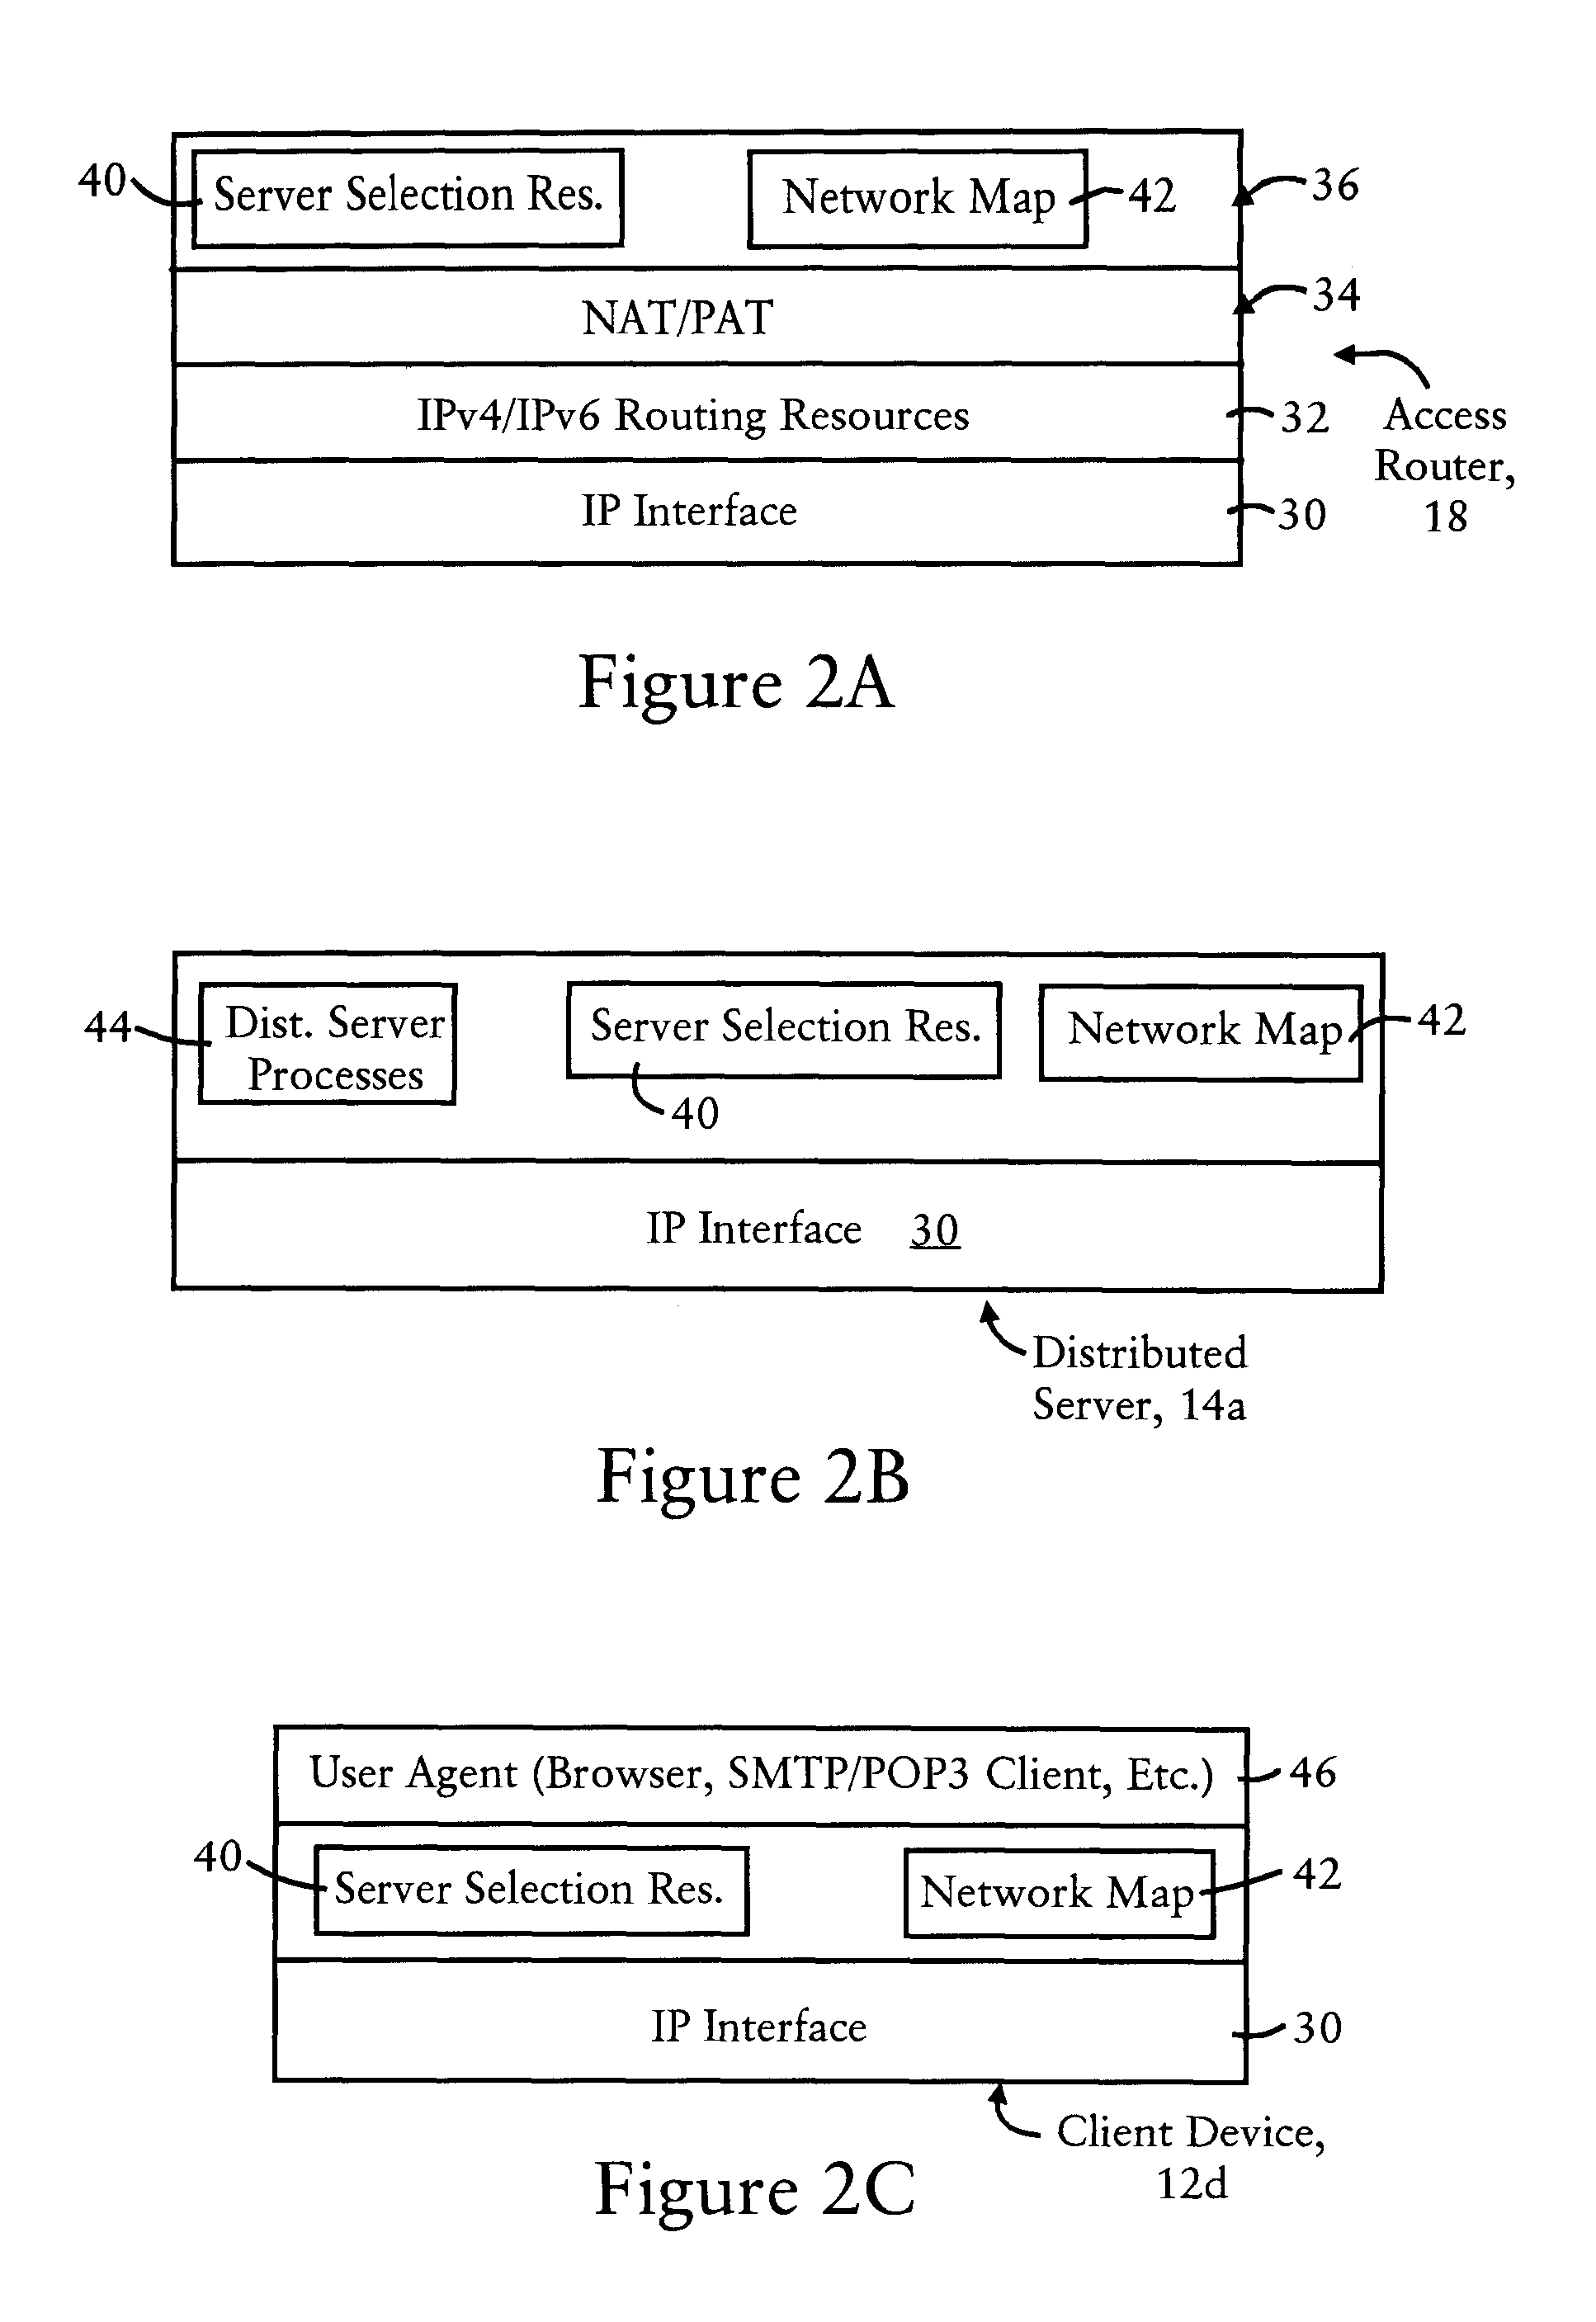 Arrangement for selecting a server to provide distributed services from among multiple servers based on a location of a client device